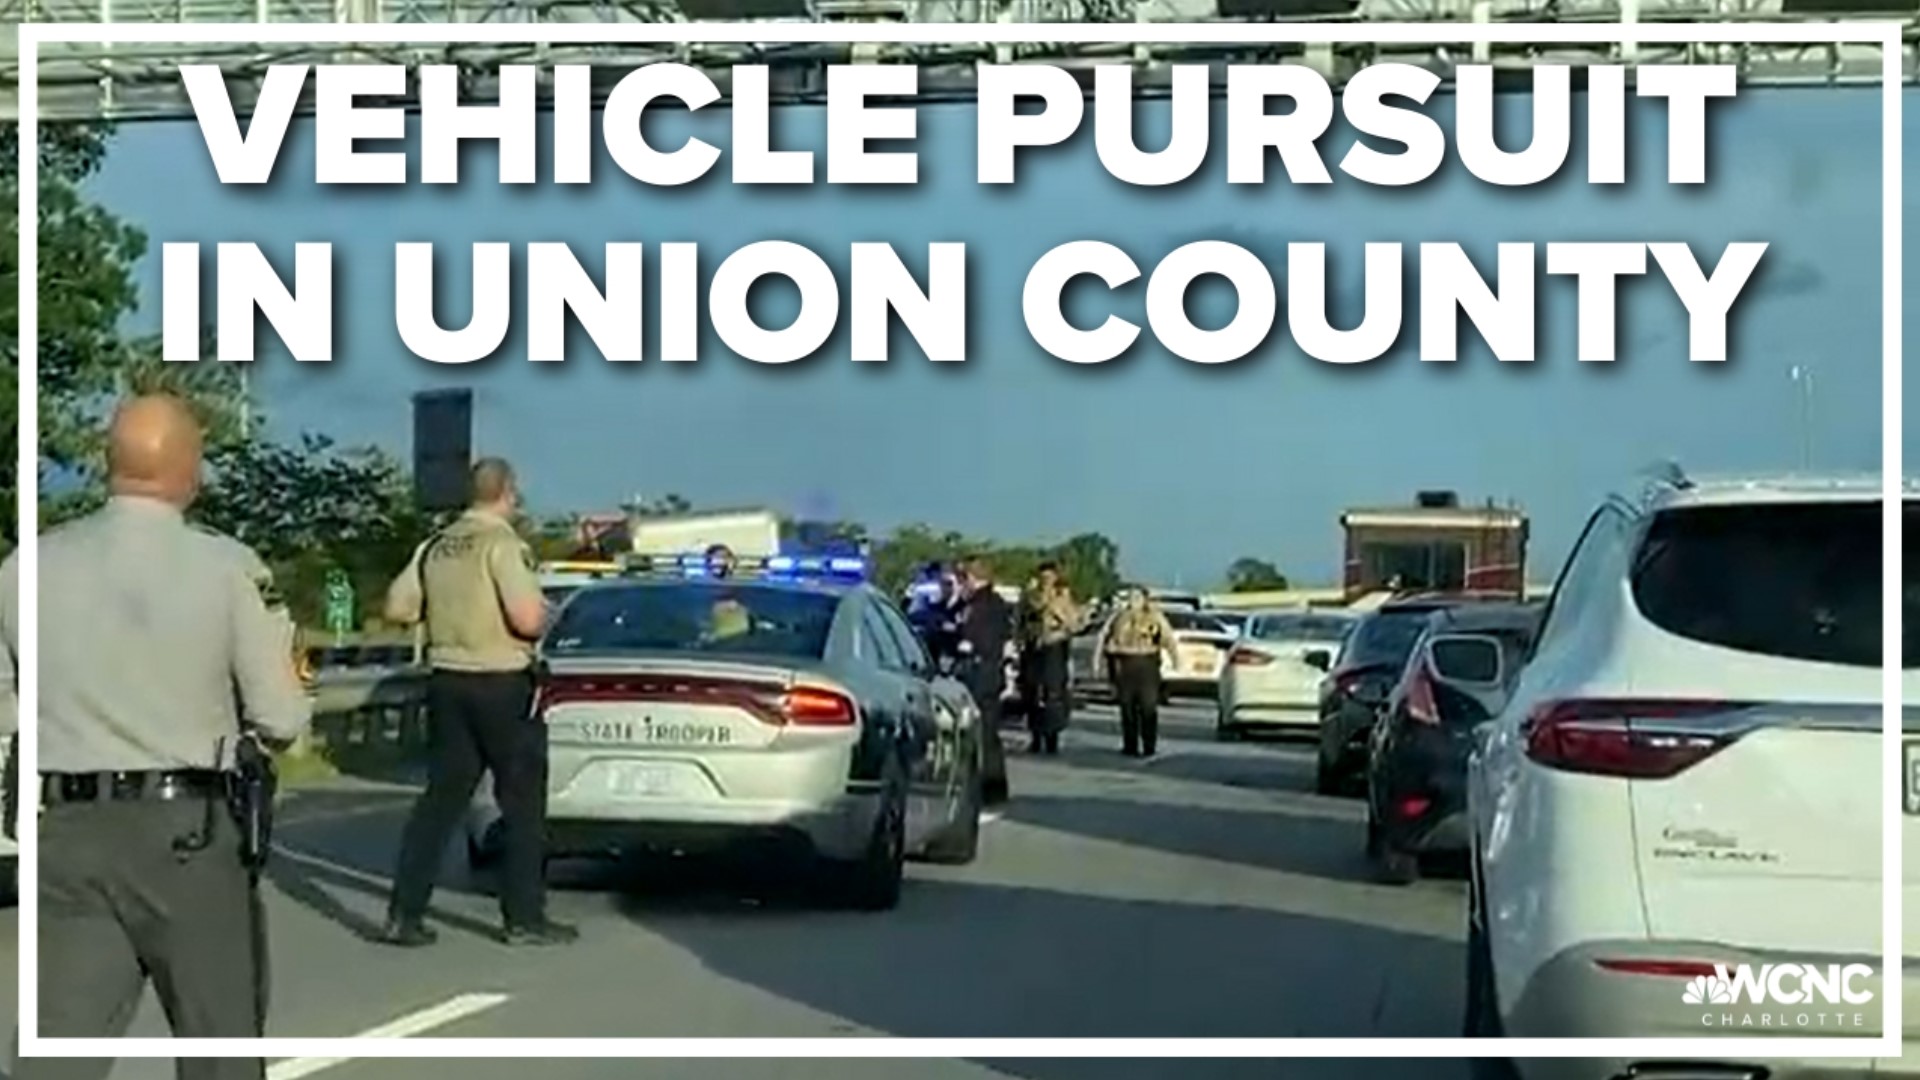 A suspect is in custody after a vehicle pursuit in Union County on Tuesday evening.